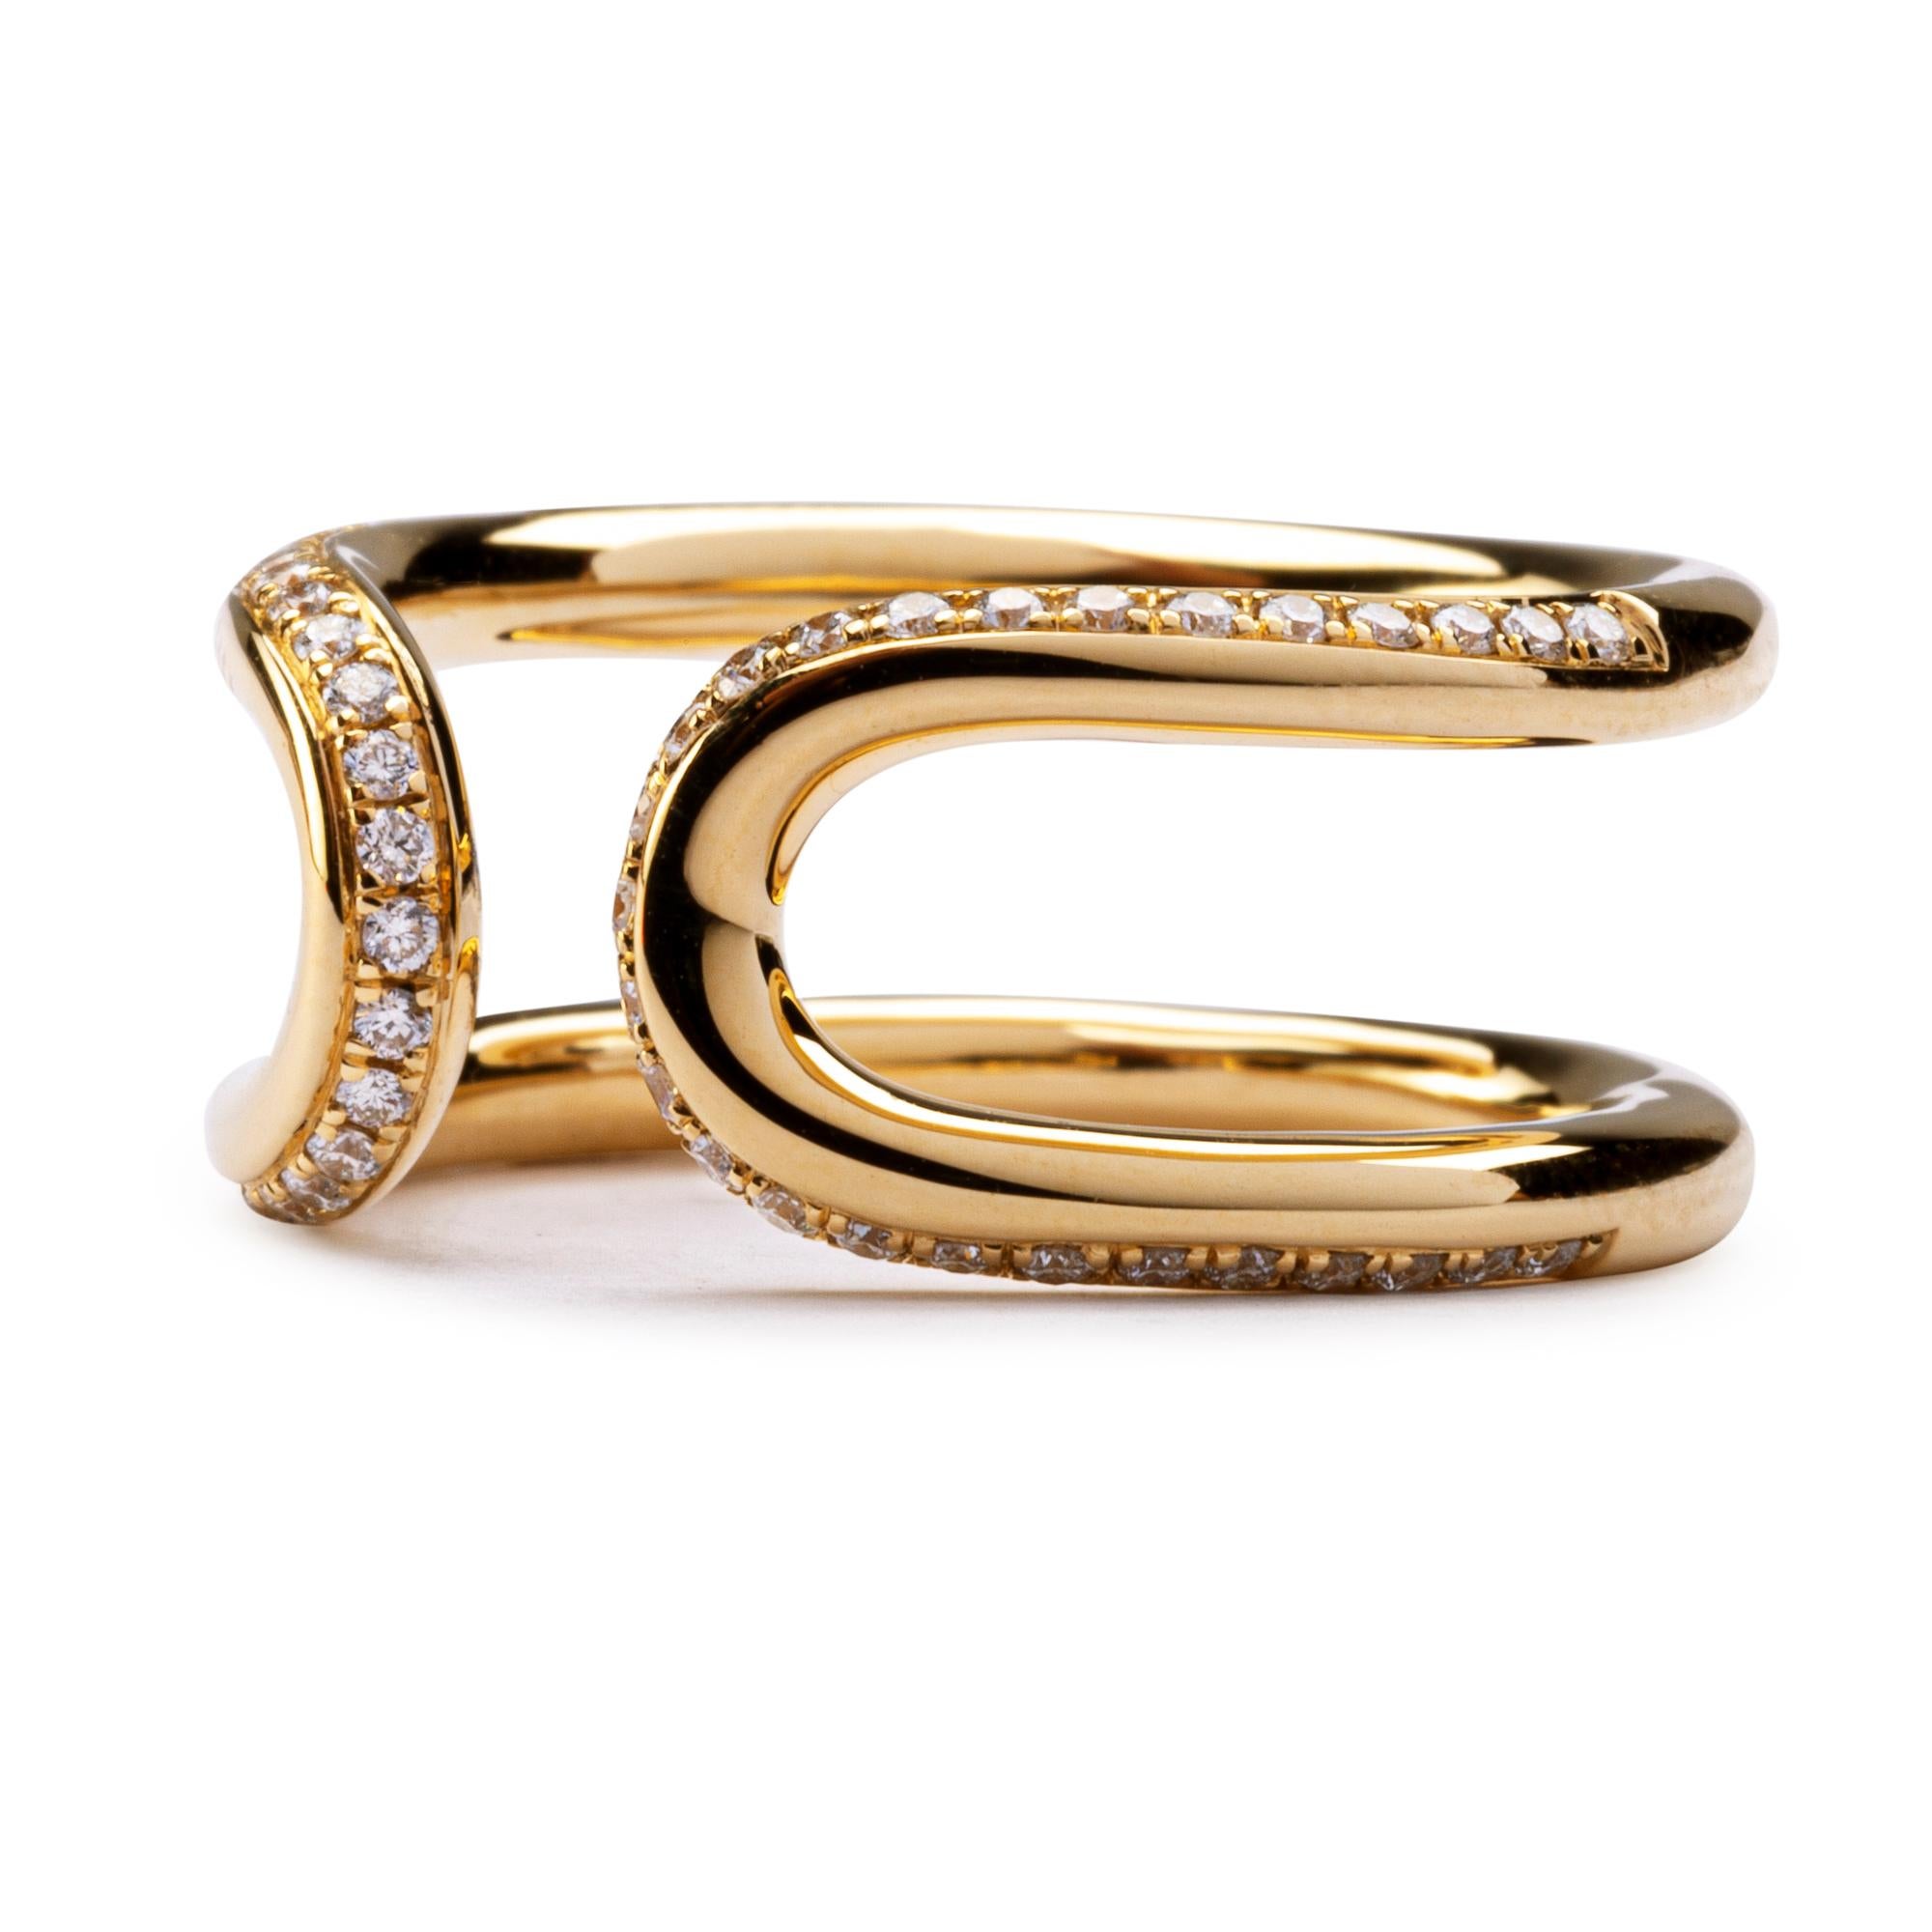 Alex Jona design collection, hand crafted in Italy, 18 Karat yellow gold  band ring set with 0.28 carats of white diamonds, F color, VVS1 Clarity, Signed Alex Jona. Size 6 can be sized.
Alex Jona jewels stand out, not only for their special design